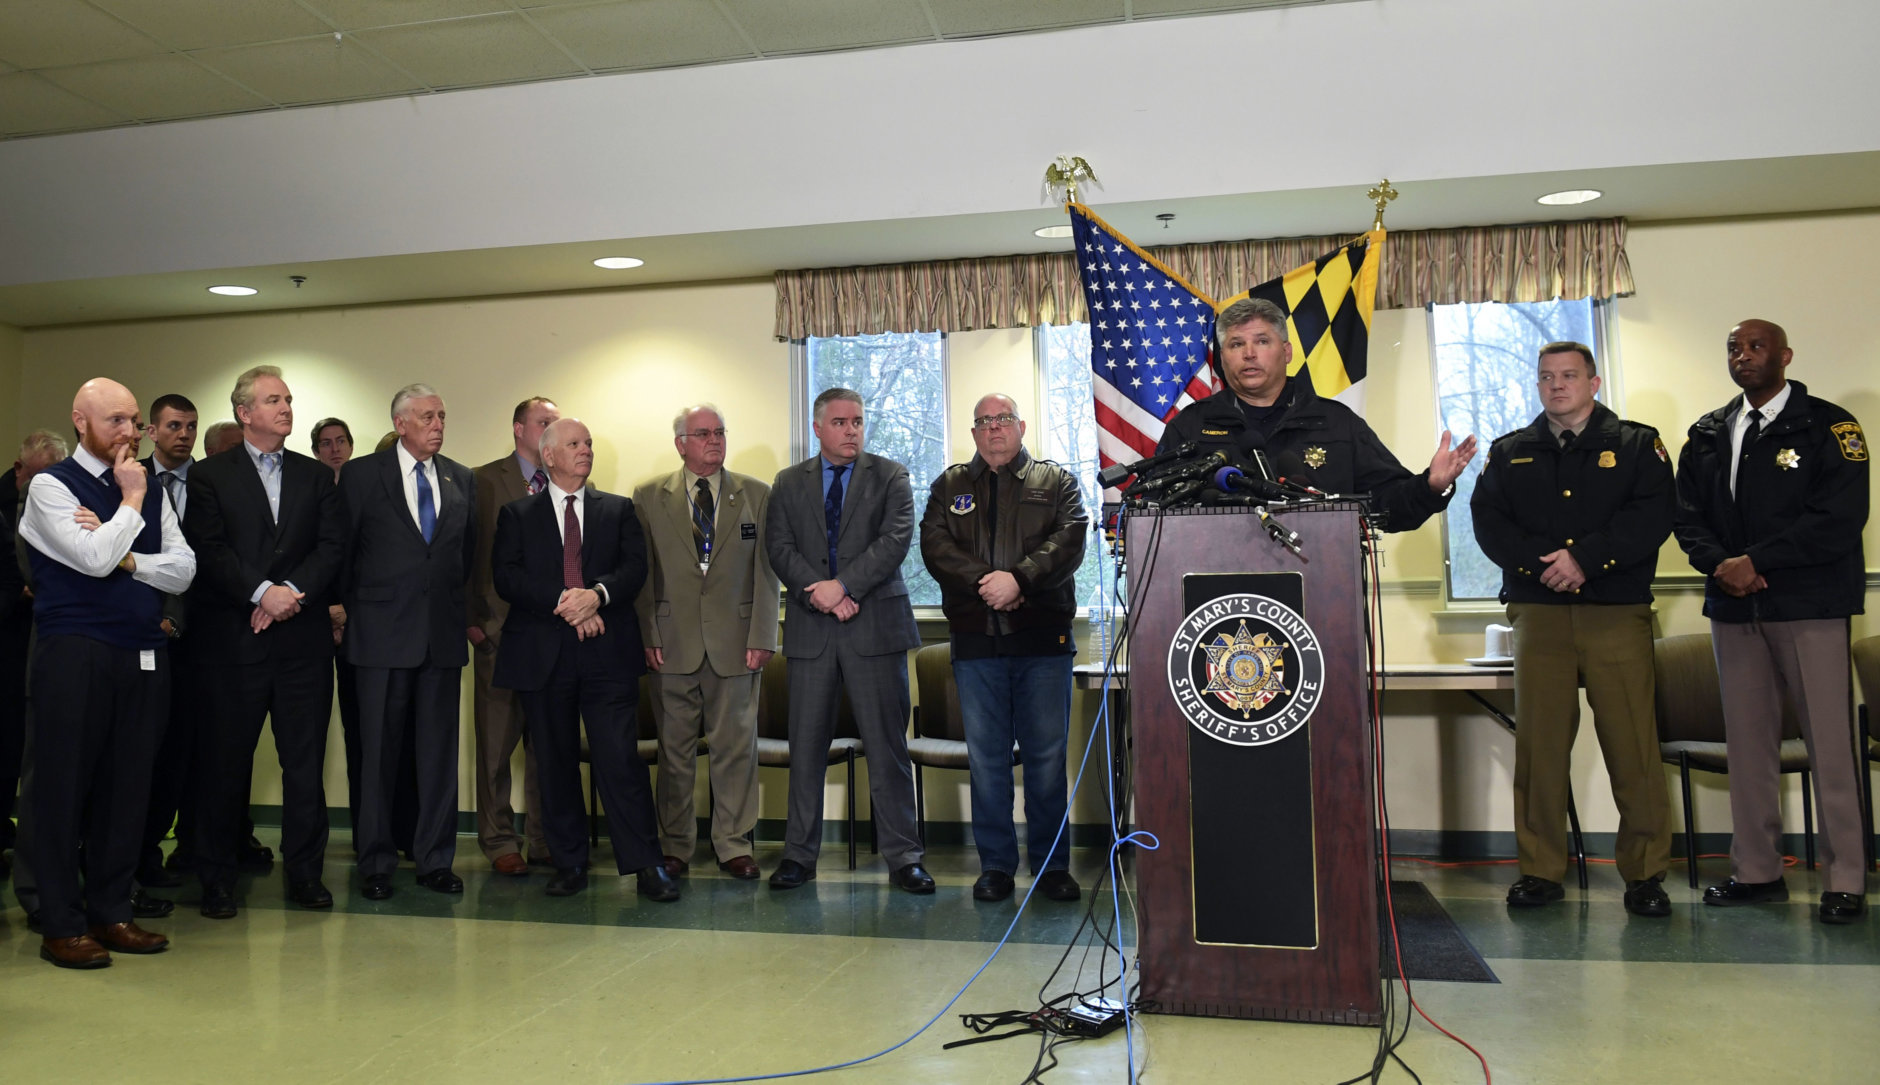 St. Mary's County Sheriff Tim Cameron, third from right, speaks about the shooting at Great Mills High School during a news conference in Great Mills, Md., Tuesday, March 20, 2018. Cameron is joined by Maryland Gov. Larry Hogan, fourth from right. (AP Photo/Susan Walsh)